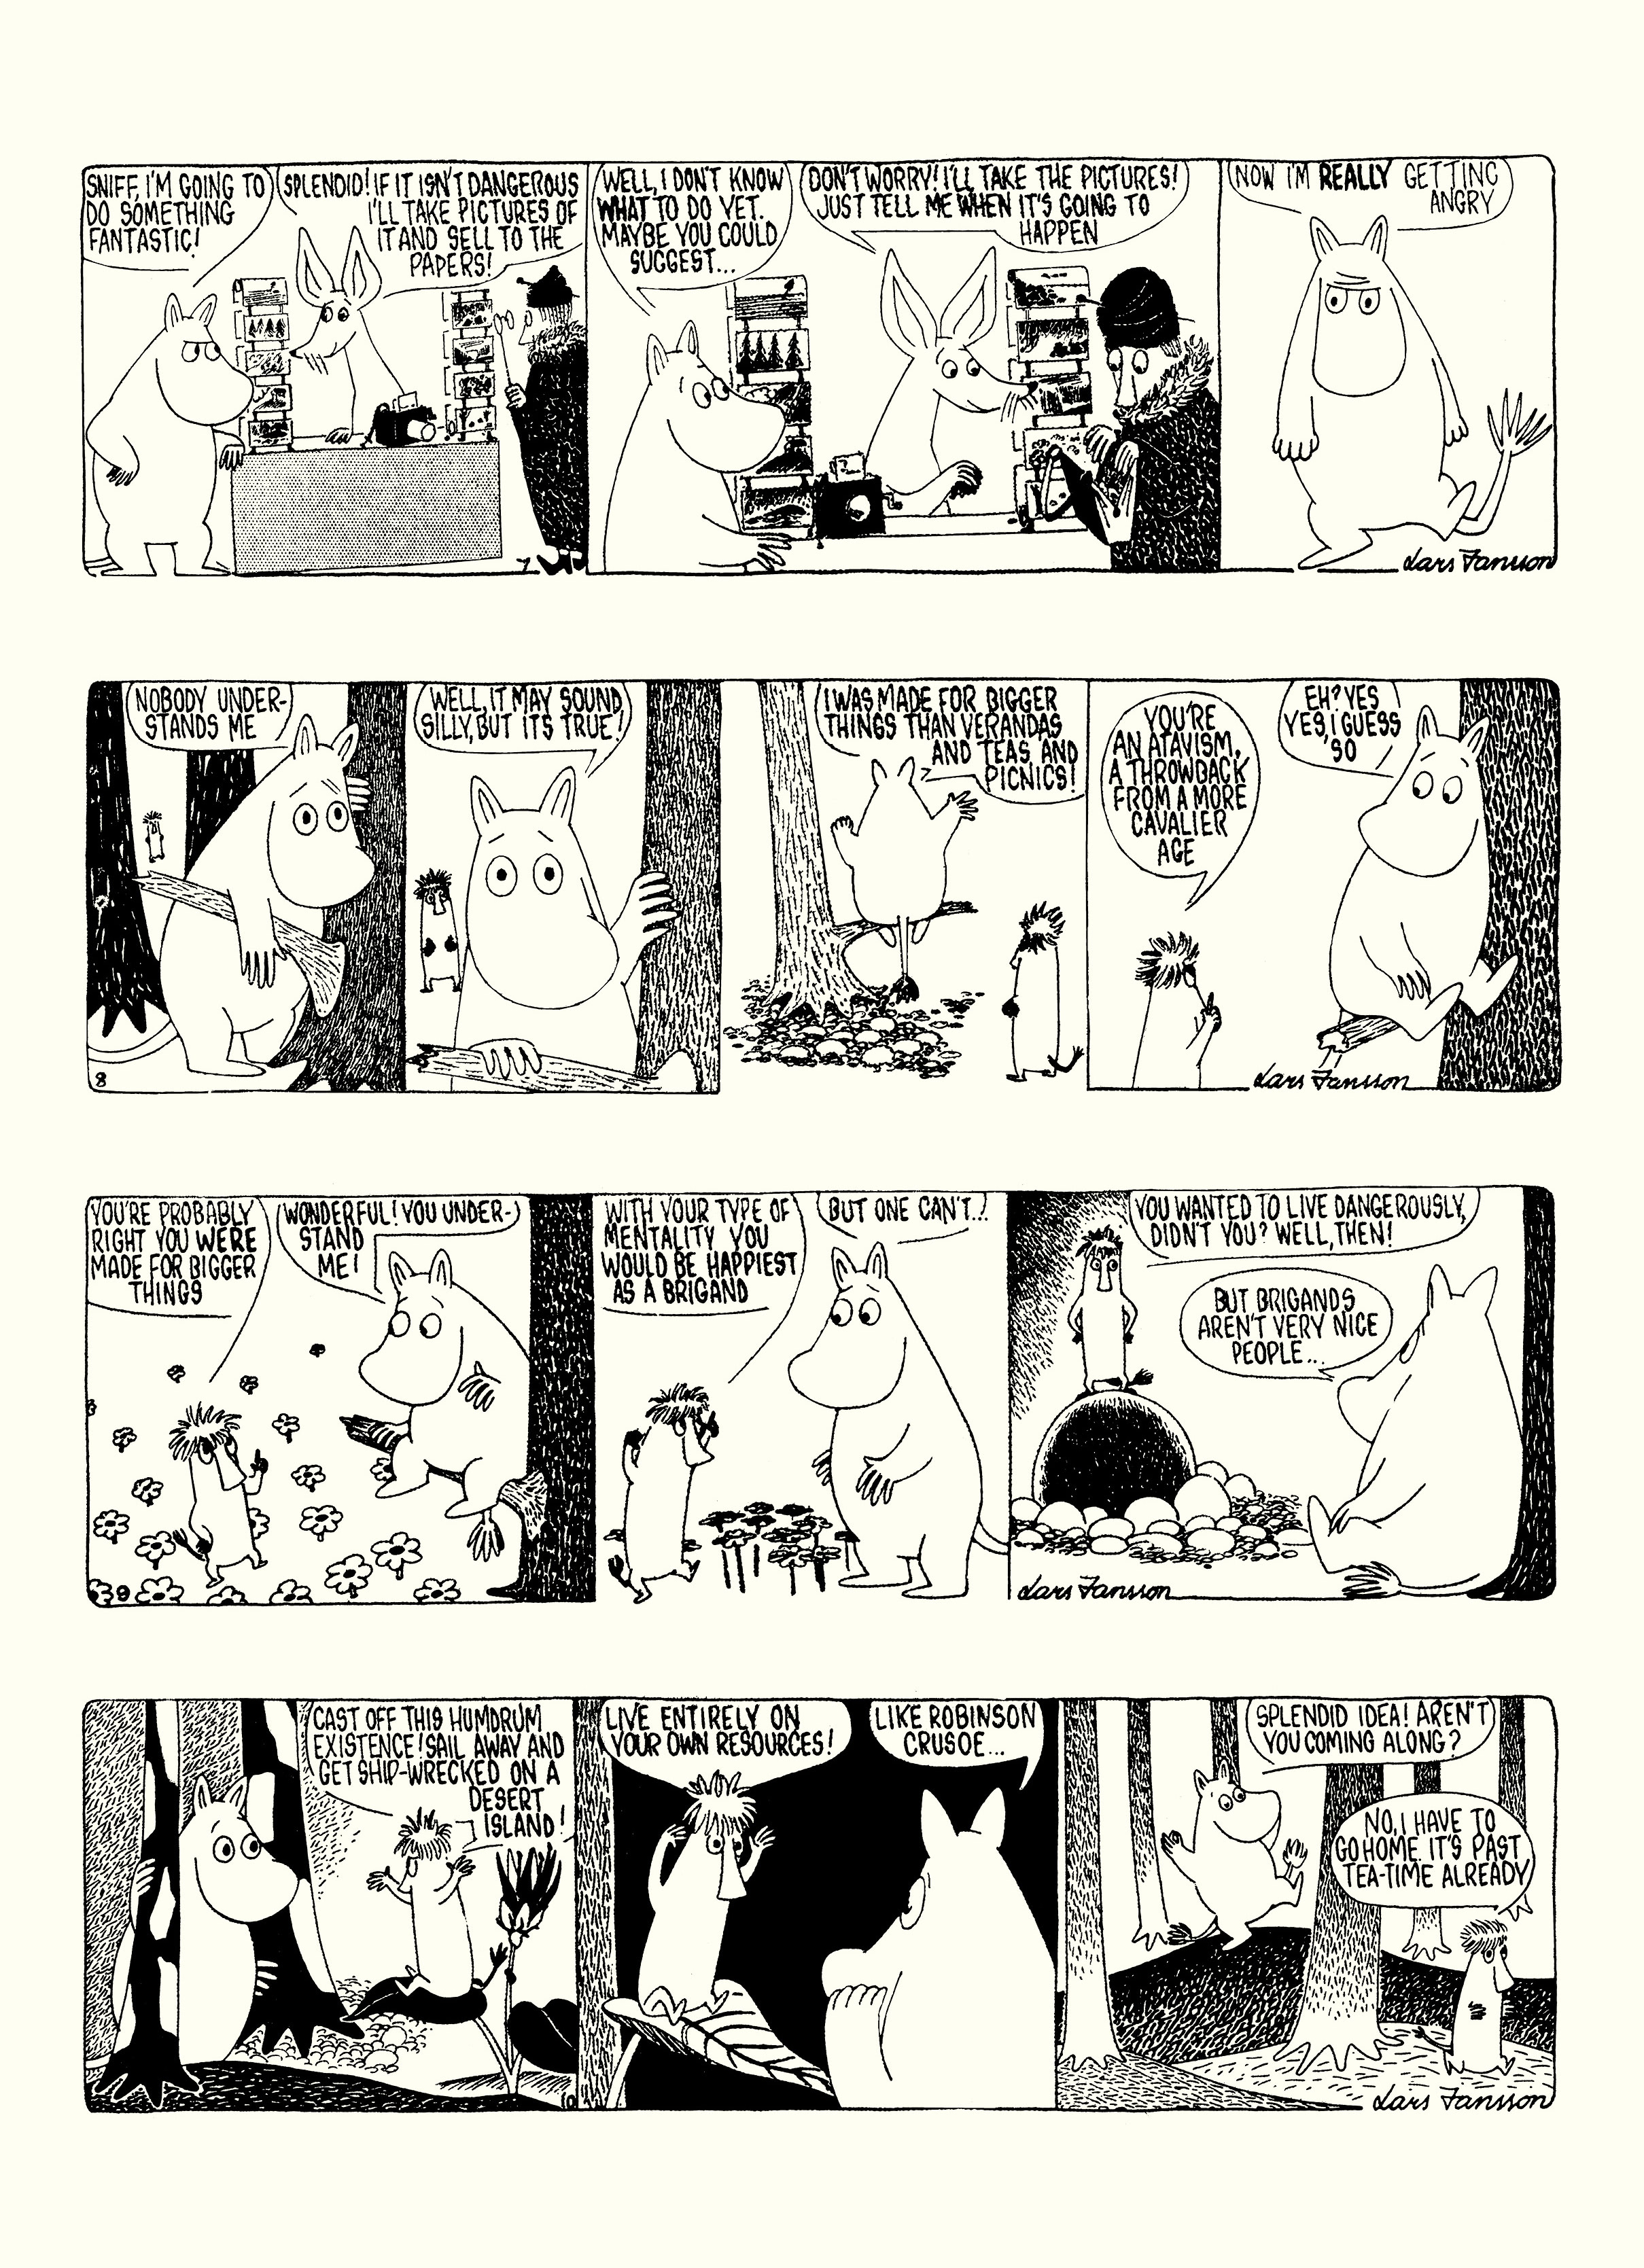 Read online Moomin: The Complete Lars Jansson Comic Strip comic -  Issue # TPB 8 - 7